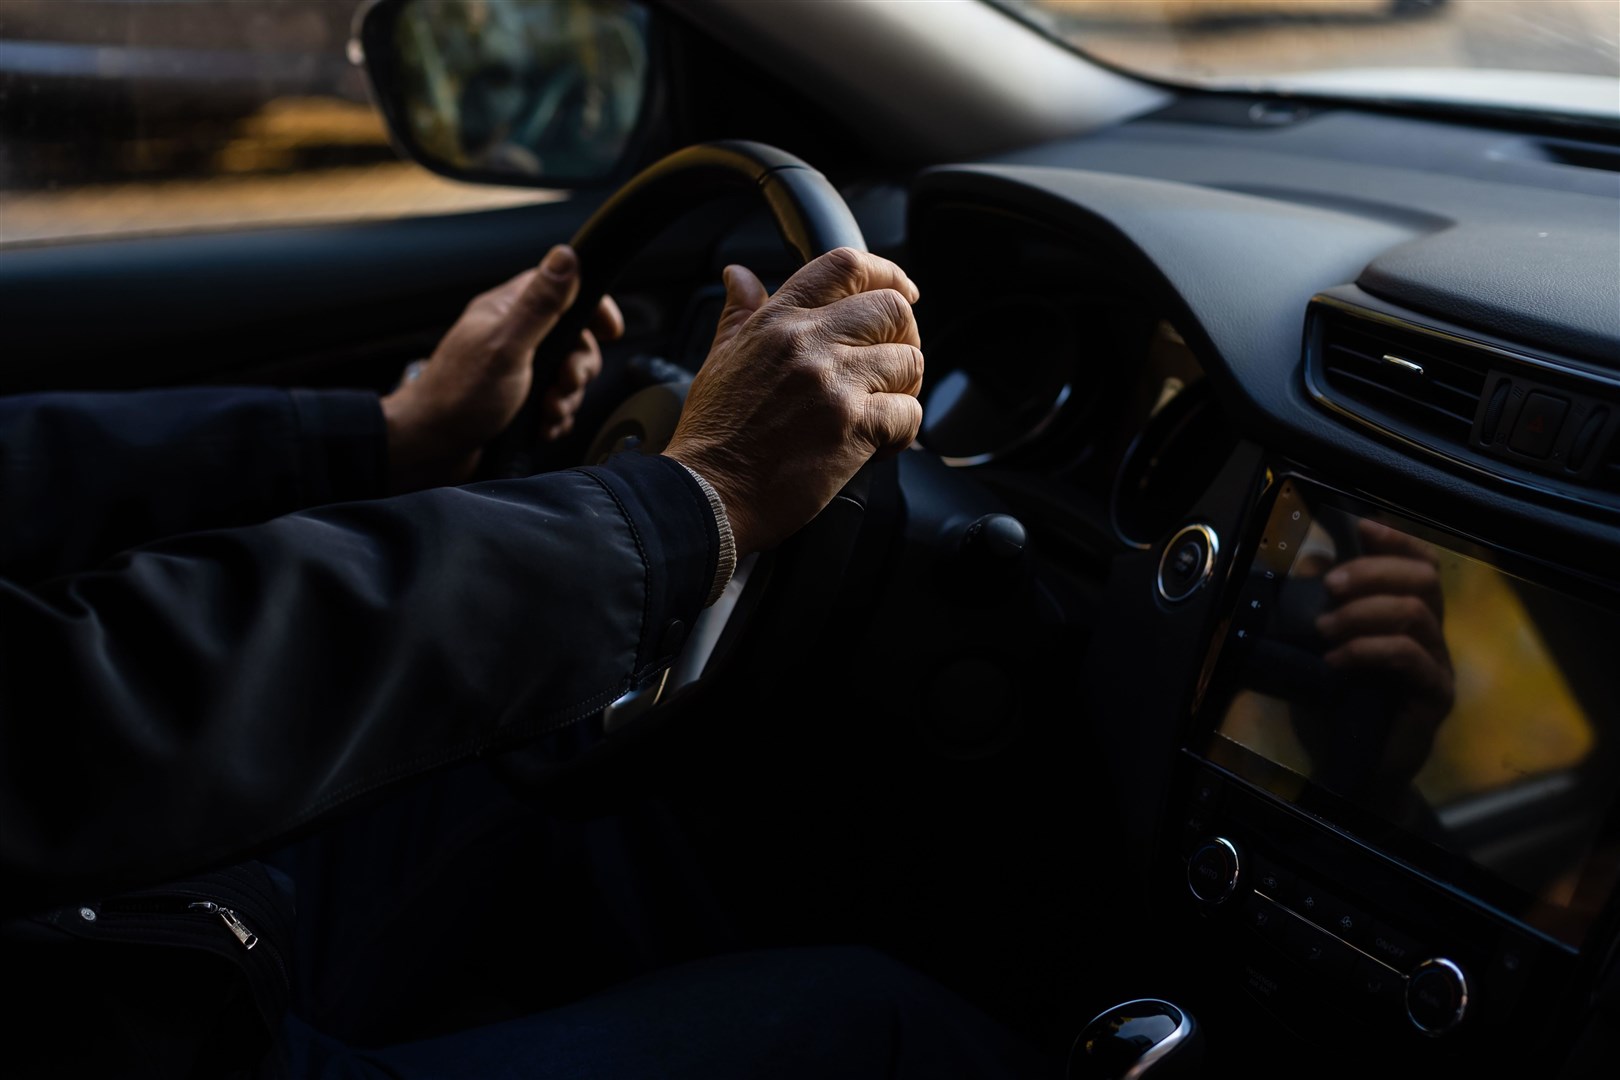 The RAC Foundation said the figures show there is a “strong case” for requiring drivers to have their eyes tested when they renew their licence (Alamy)